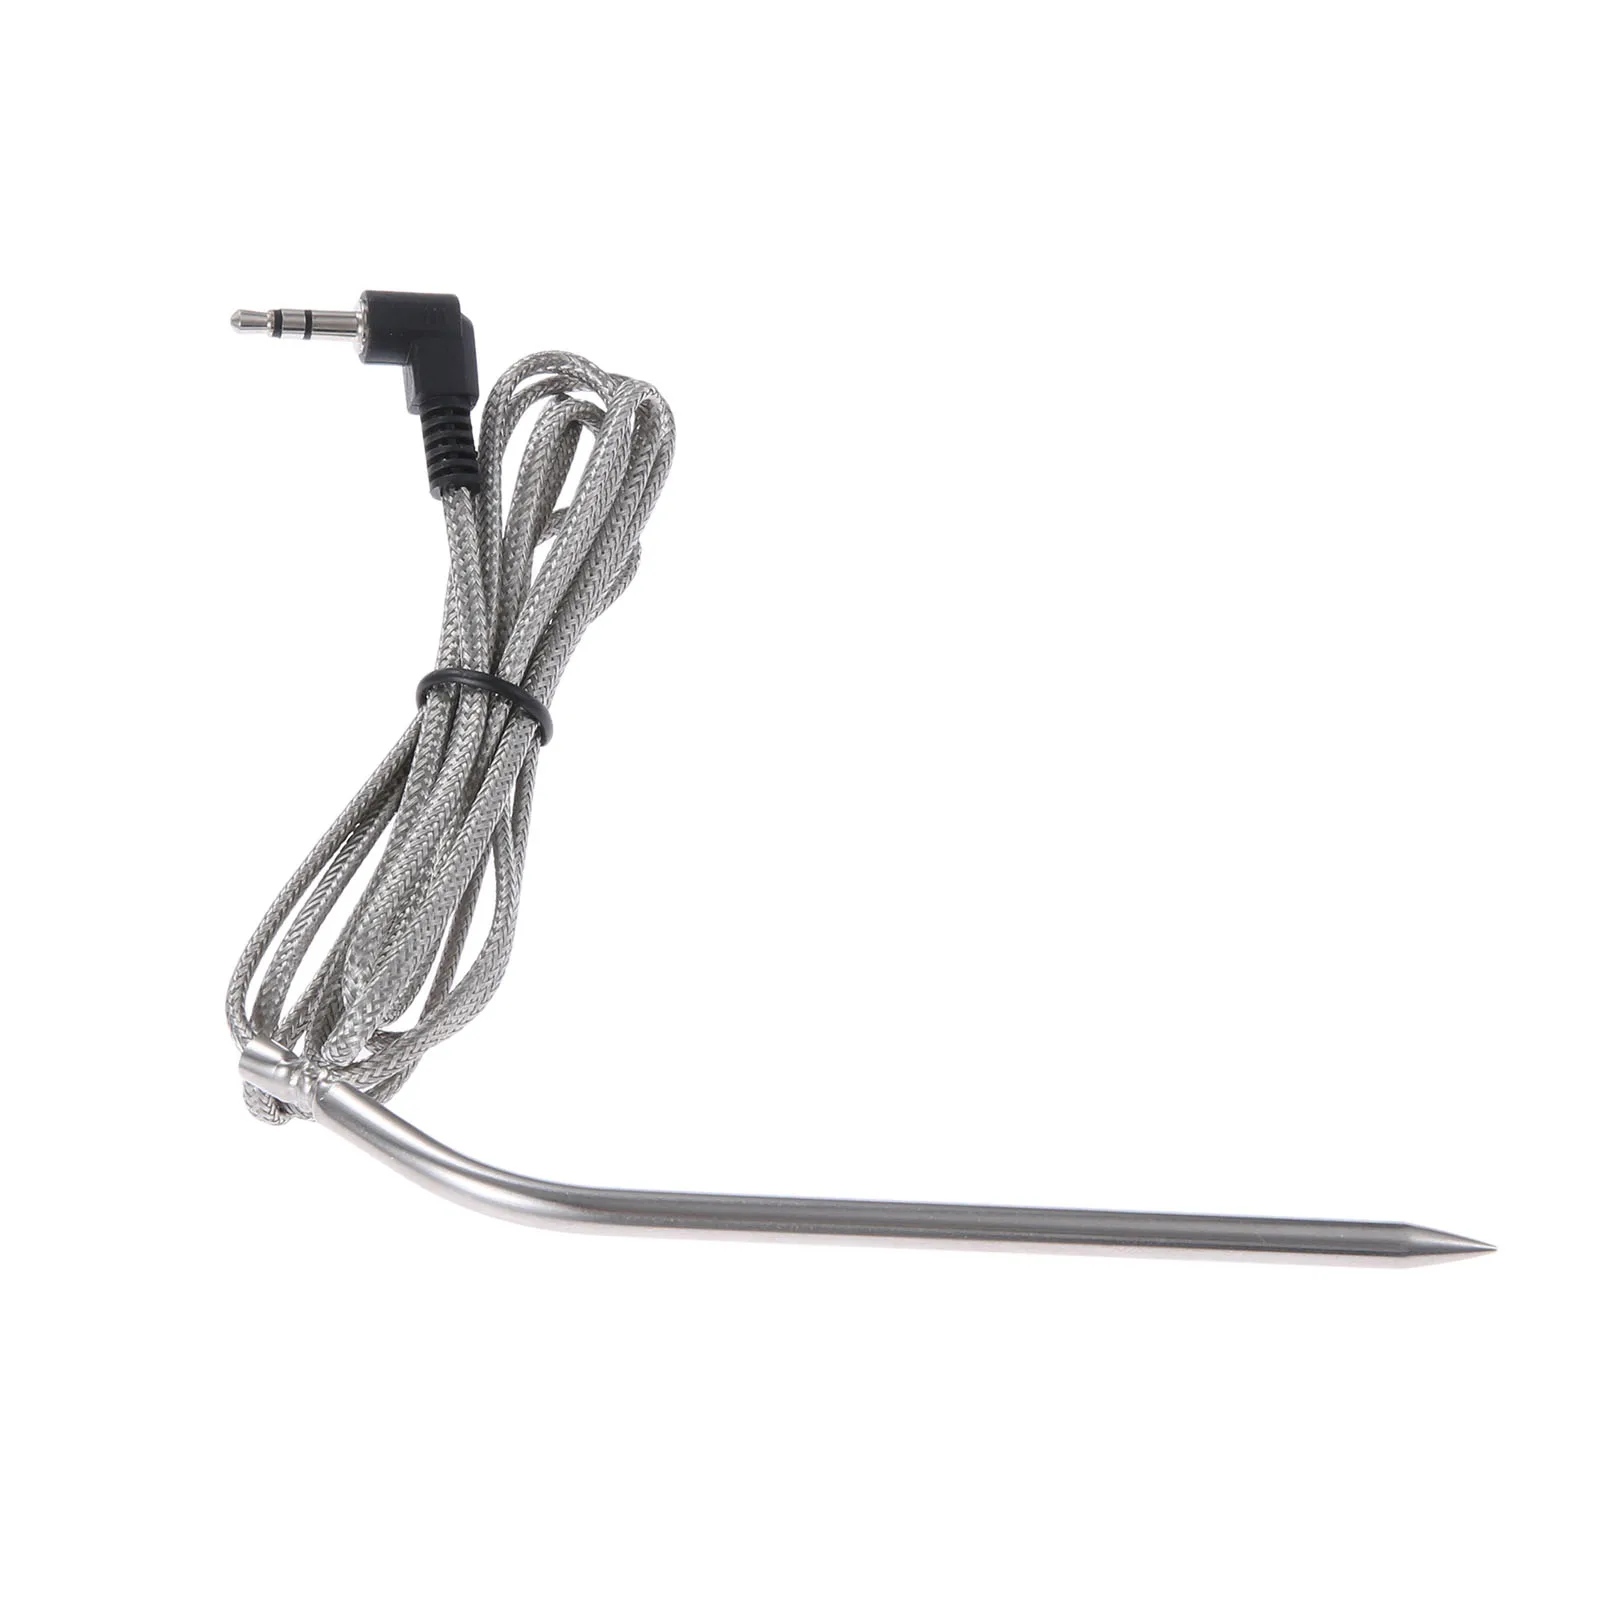 High-Temperature Meat BBQ Probe CC-N01 14cm 5.5 Inch fit for